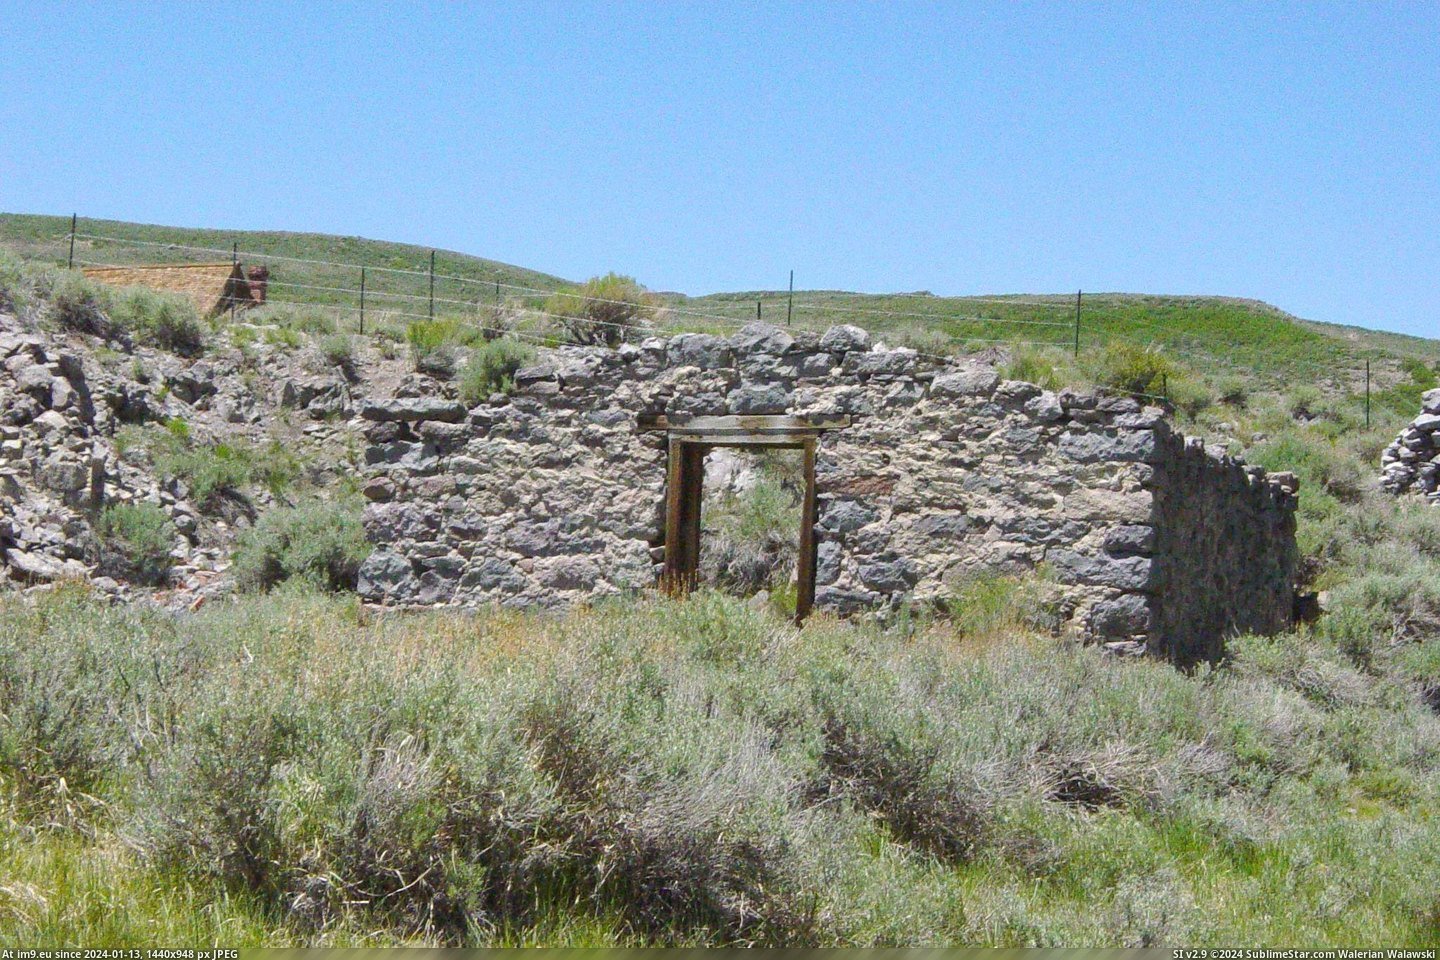 #California #Ruins #Moyle #Bodie #Warehouse Moyle Warehouse Ruins In Bodie, California Pic. (Bild von album Bodie - a ghost town in Eastern California))